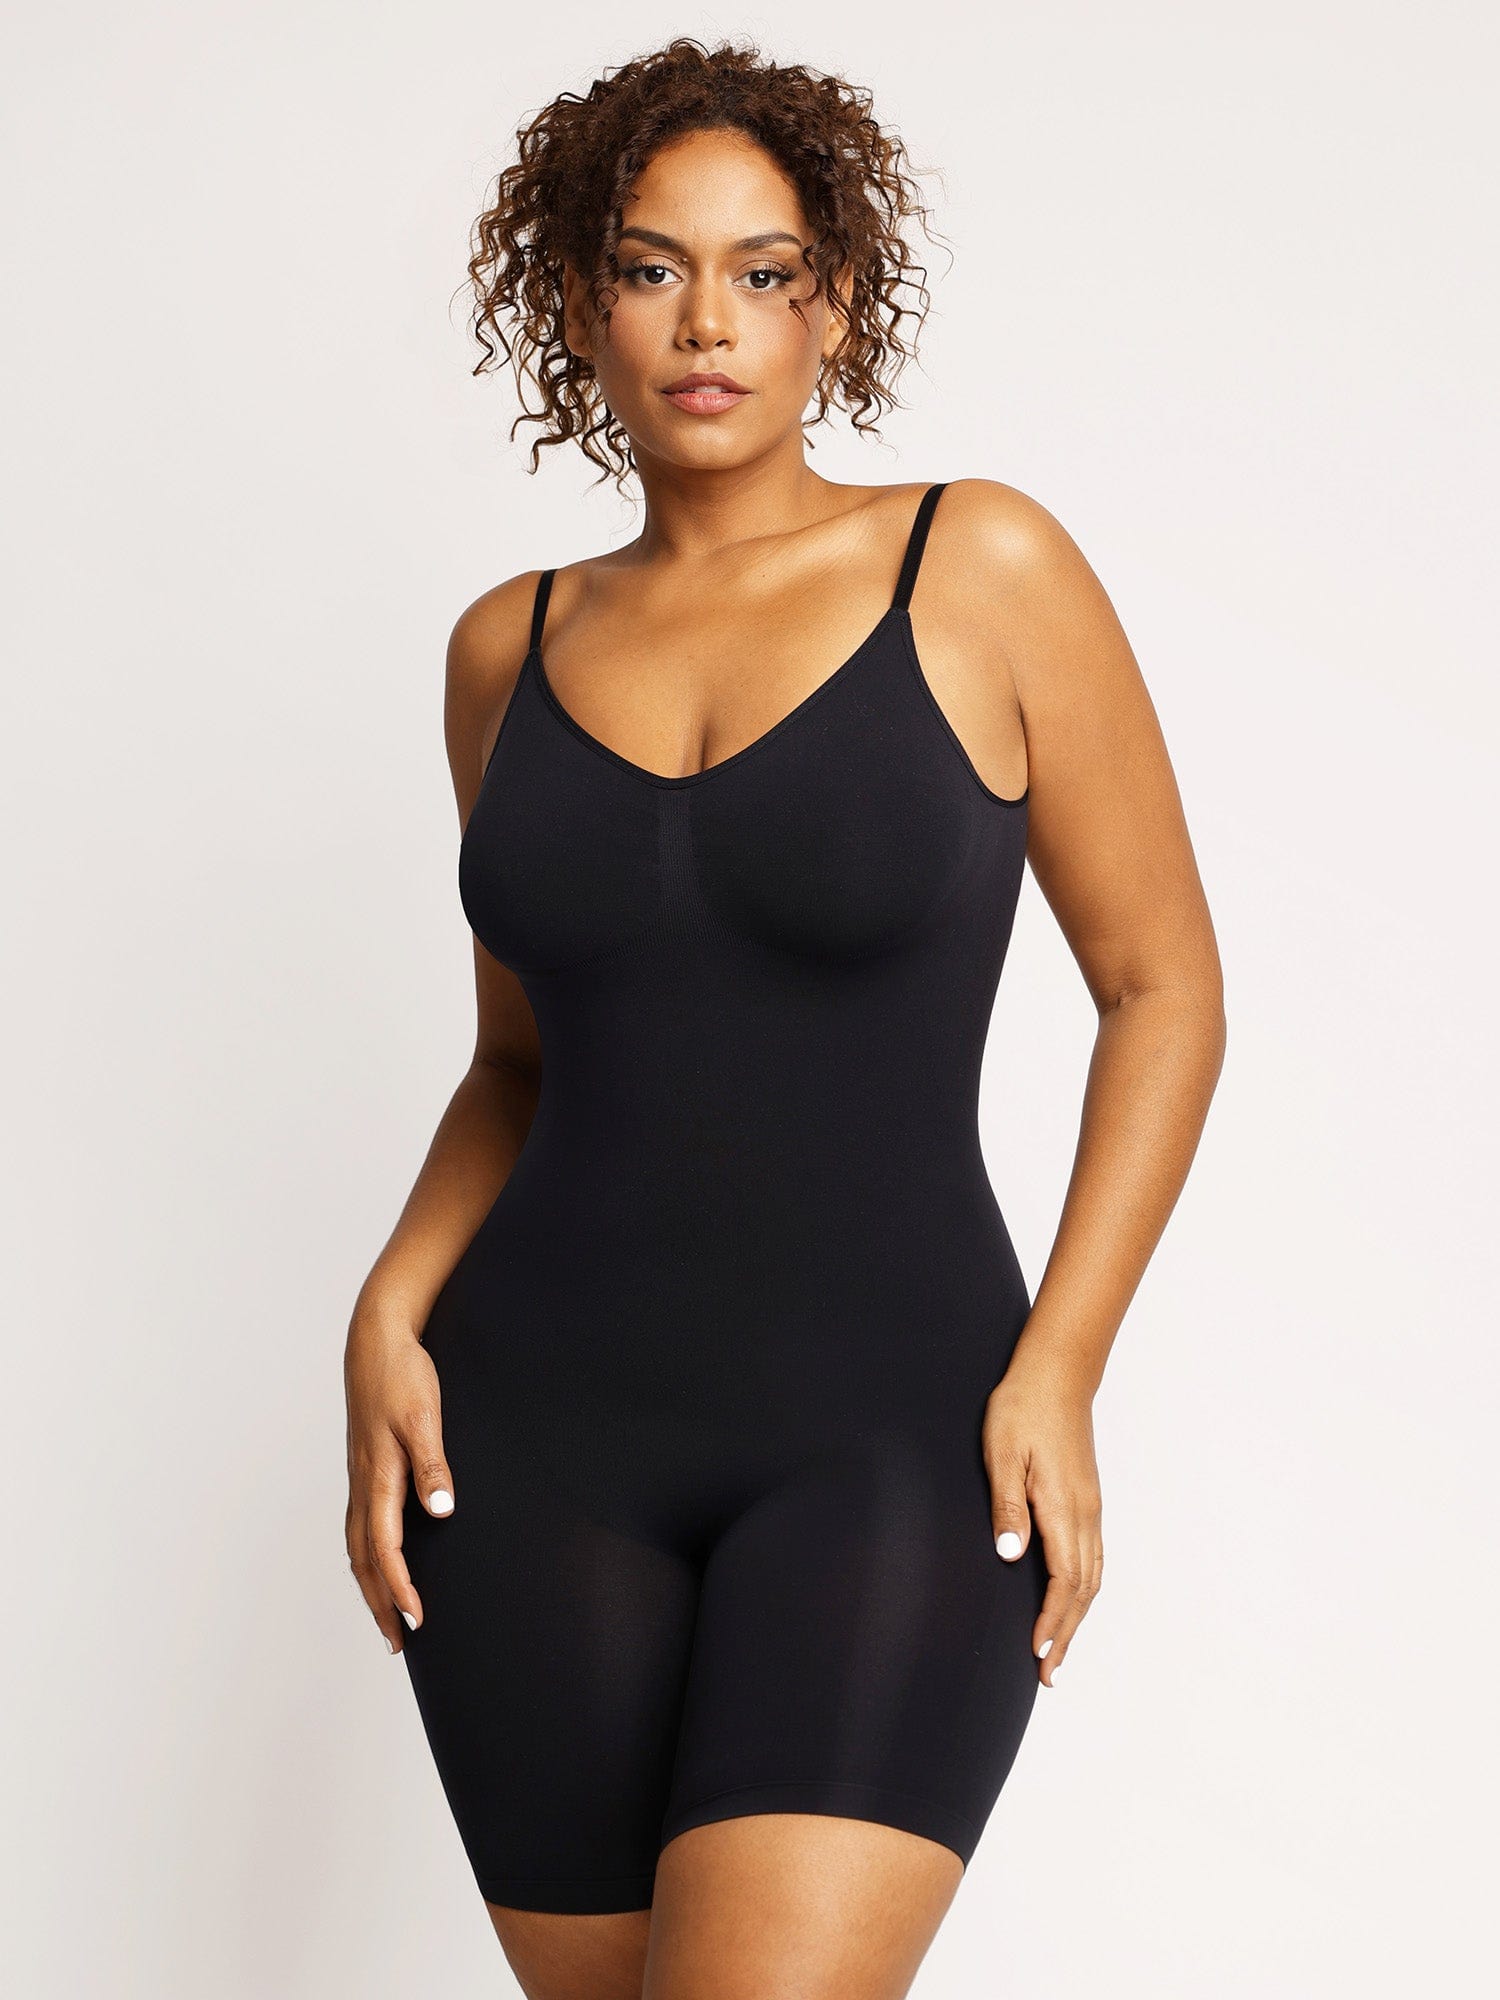 Spanx Size 8-10 M/L High-Waisted Mid-Thigh Short Shapewear